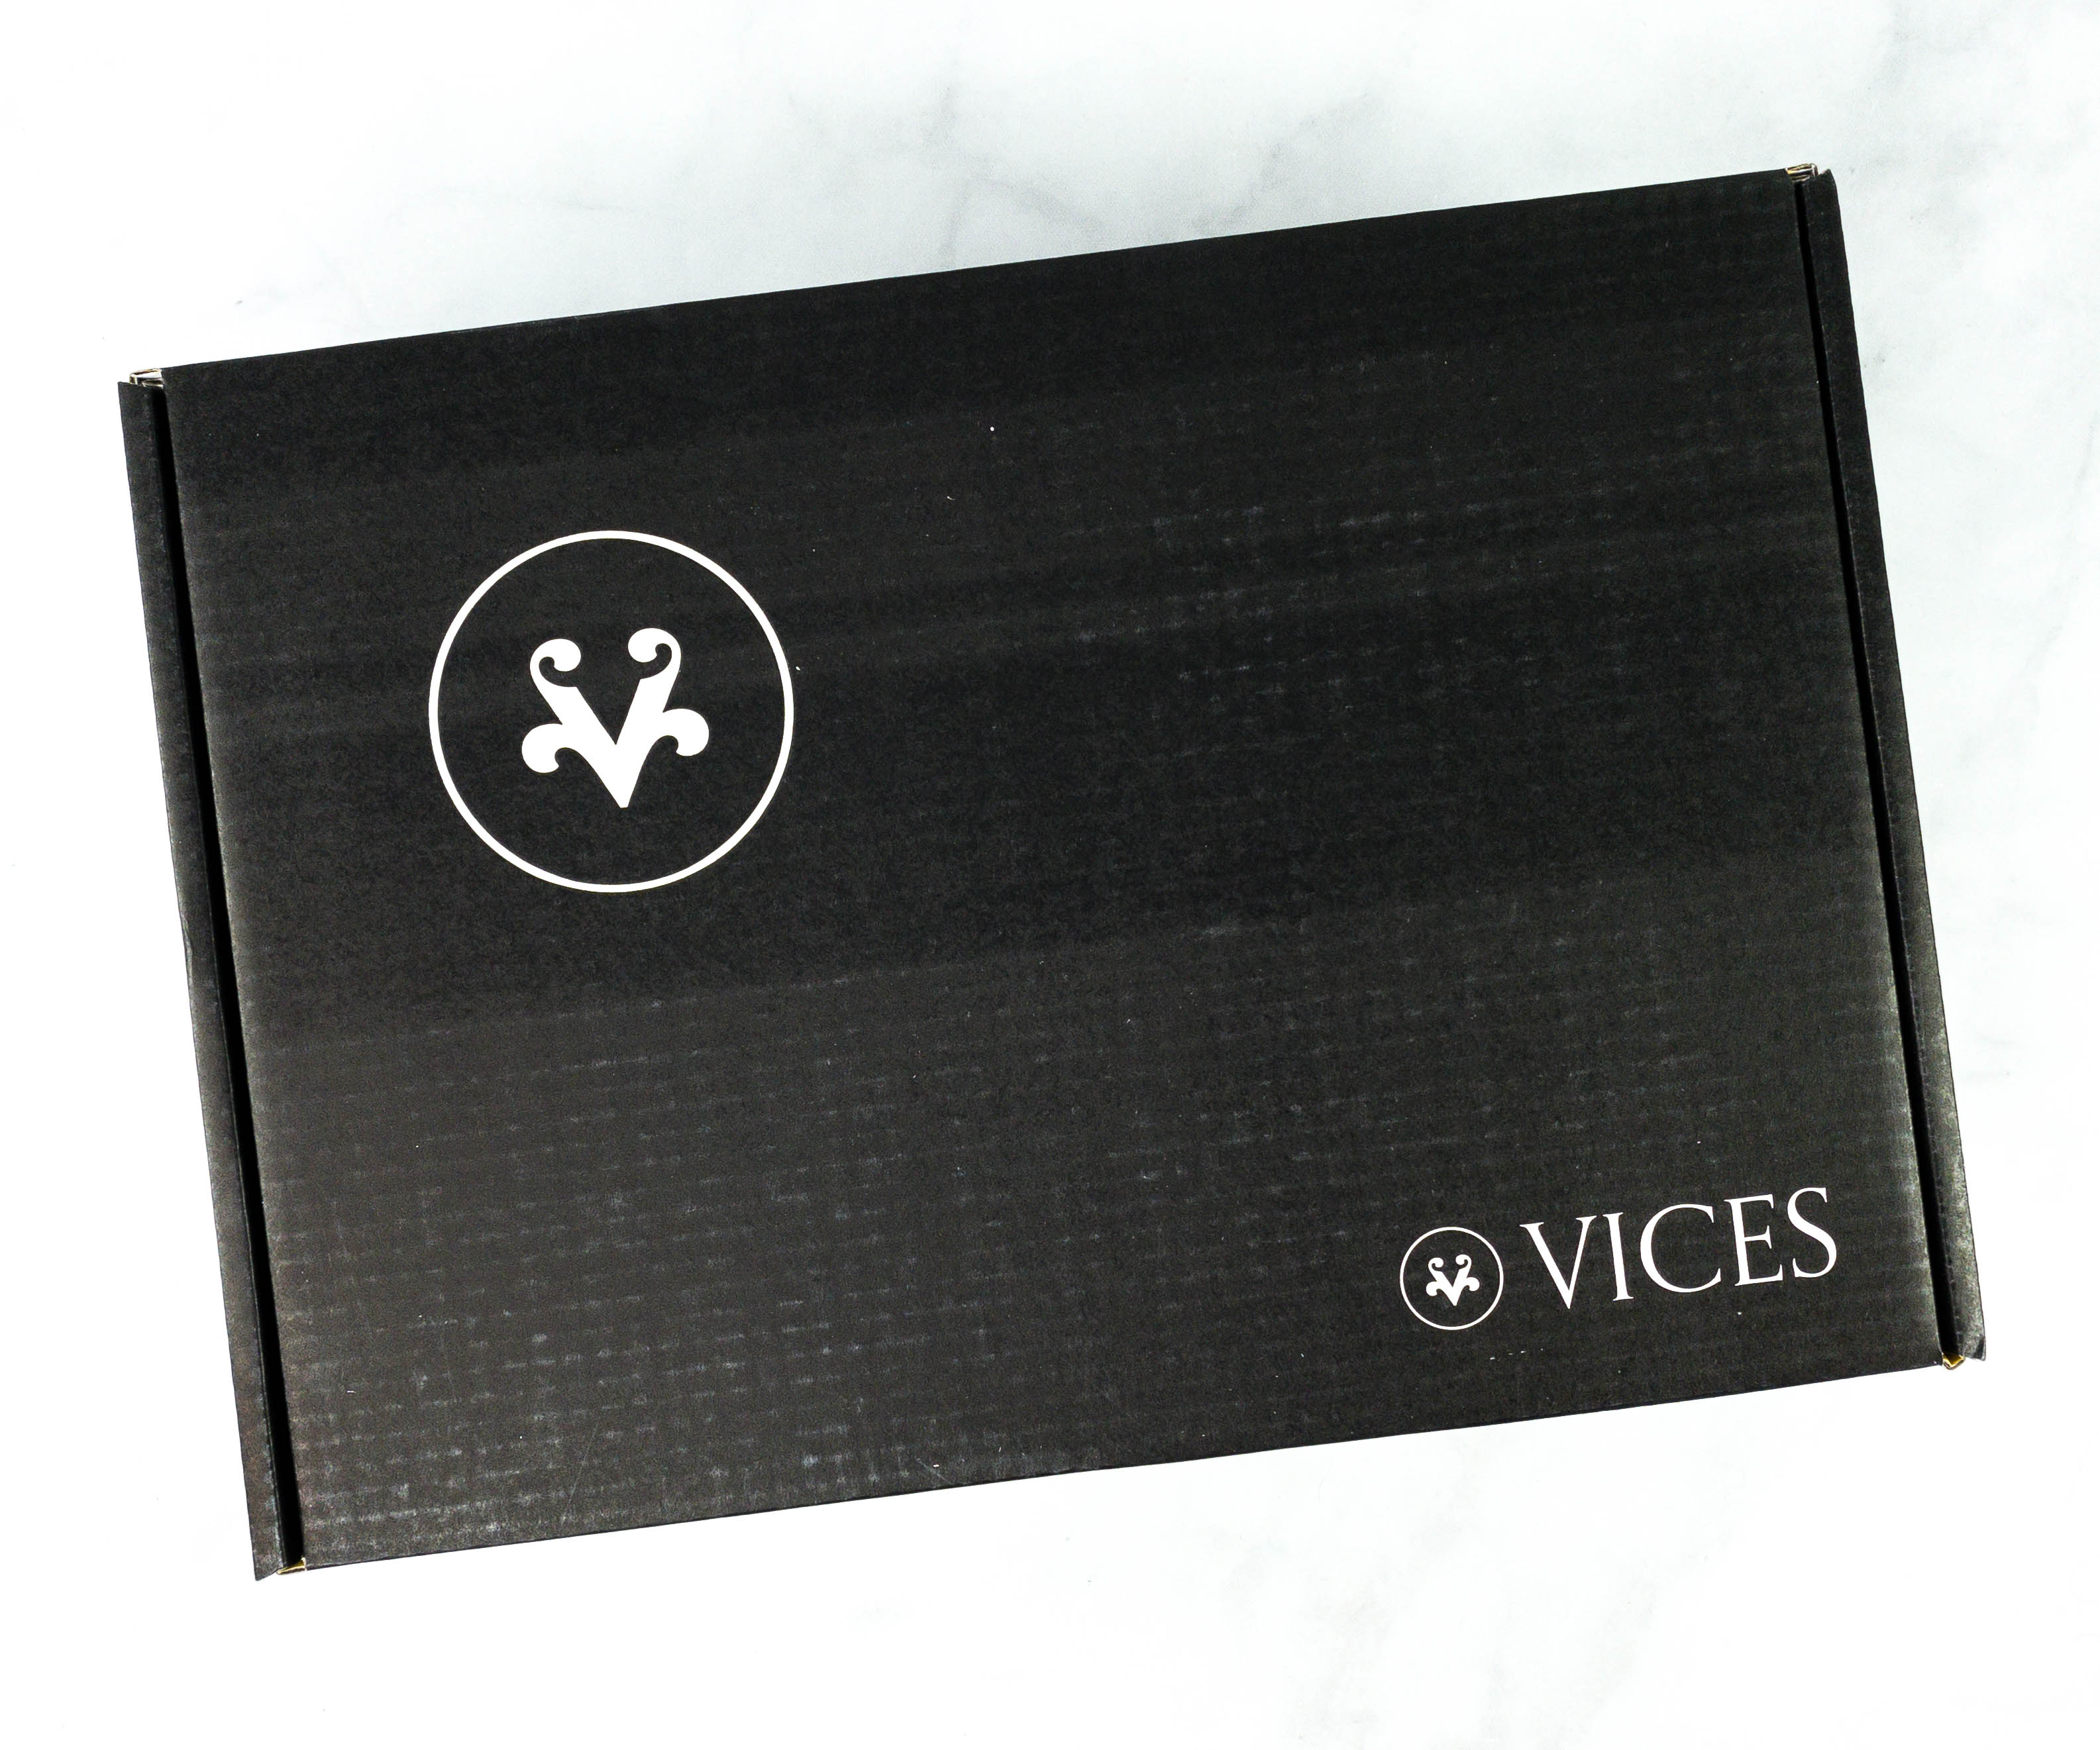 Vices September 2020 Subscription Box Review + Coupon! - Hello Subscription